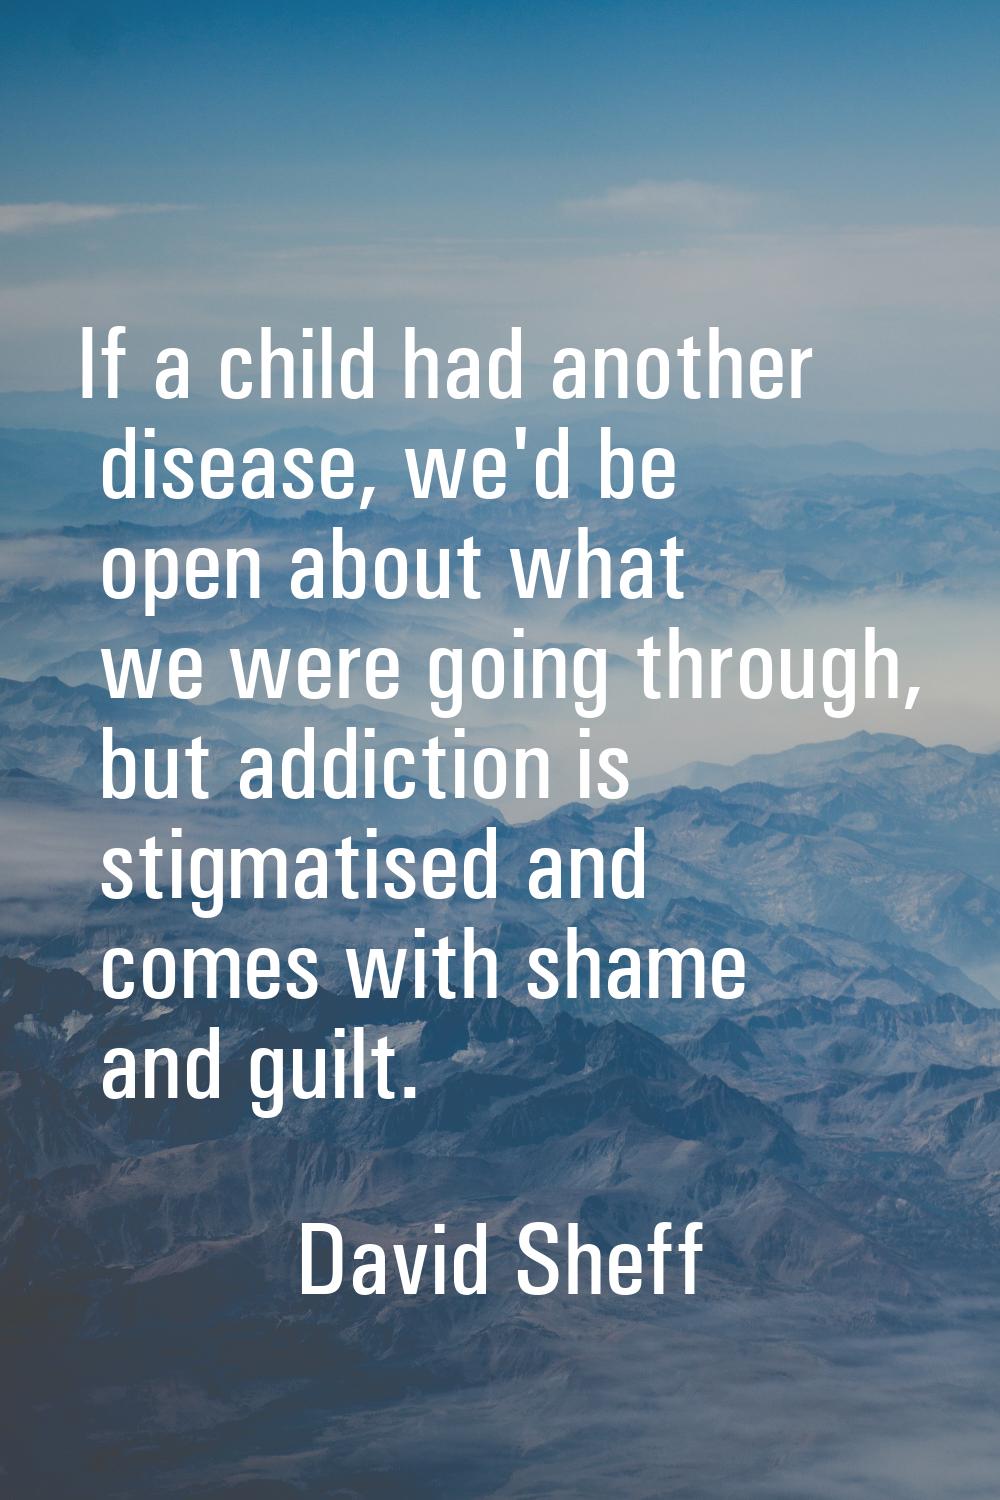 If a child had another disease, we'd be open about what we were going through, but addiction is sti